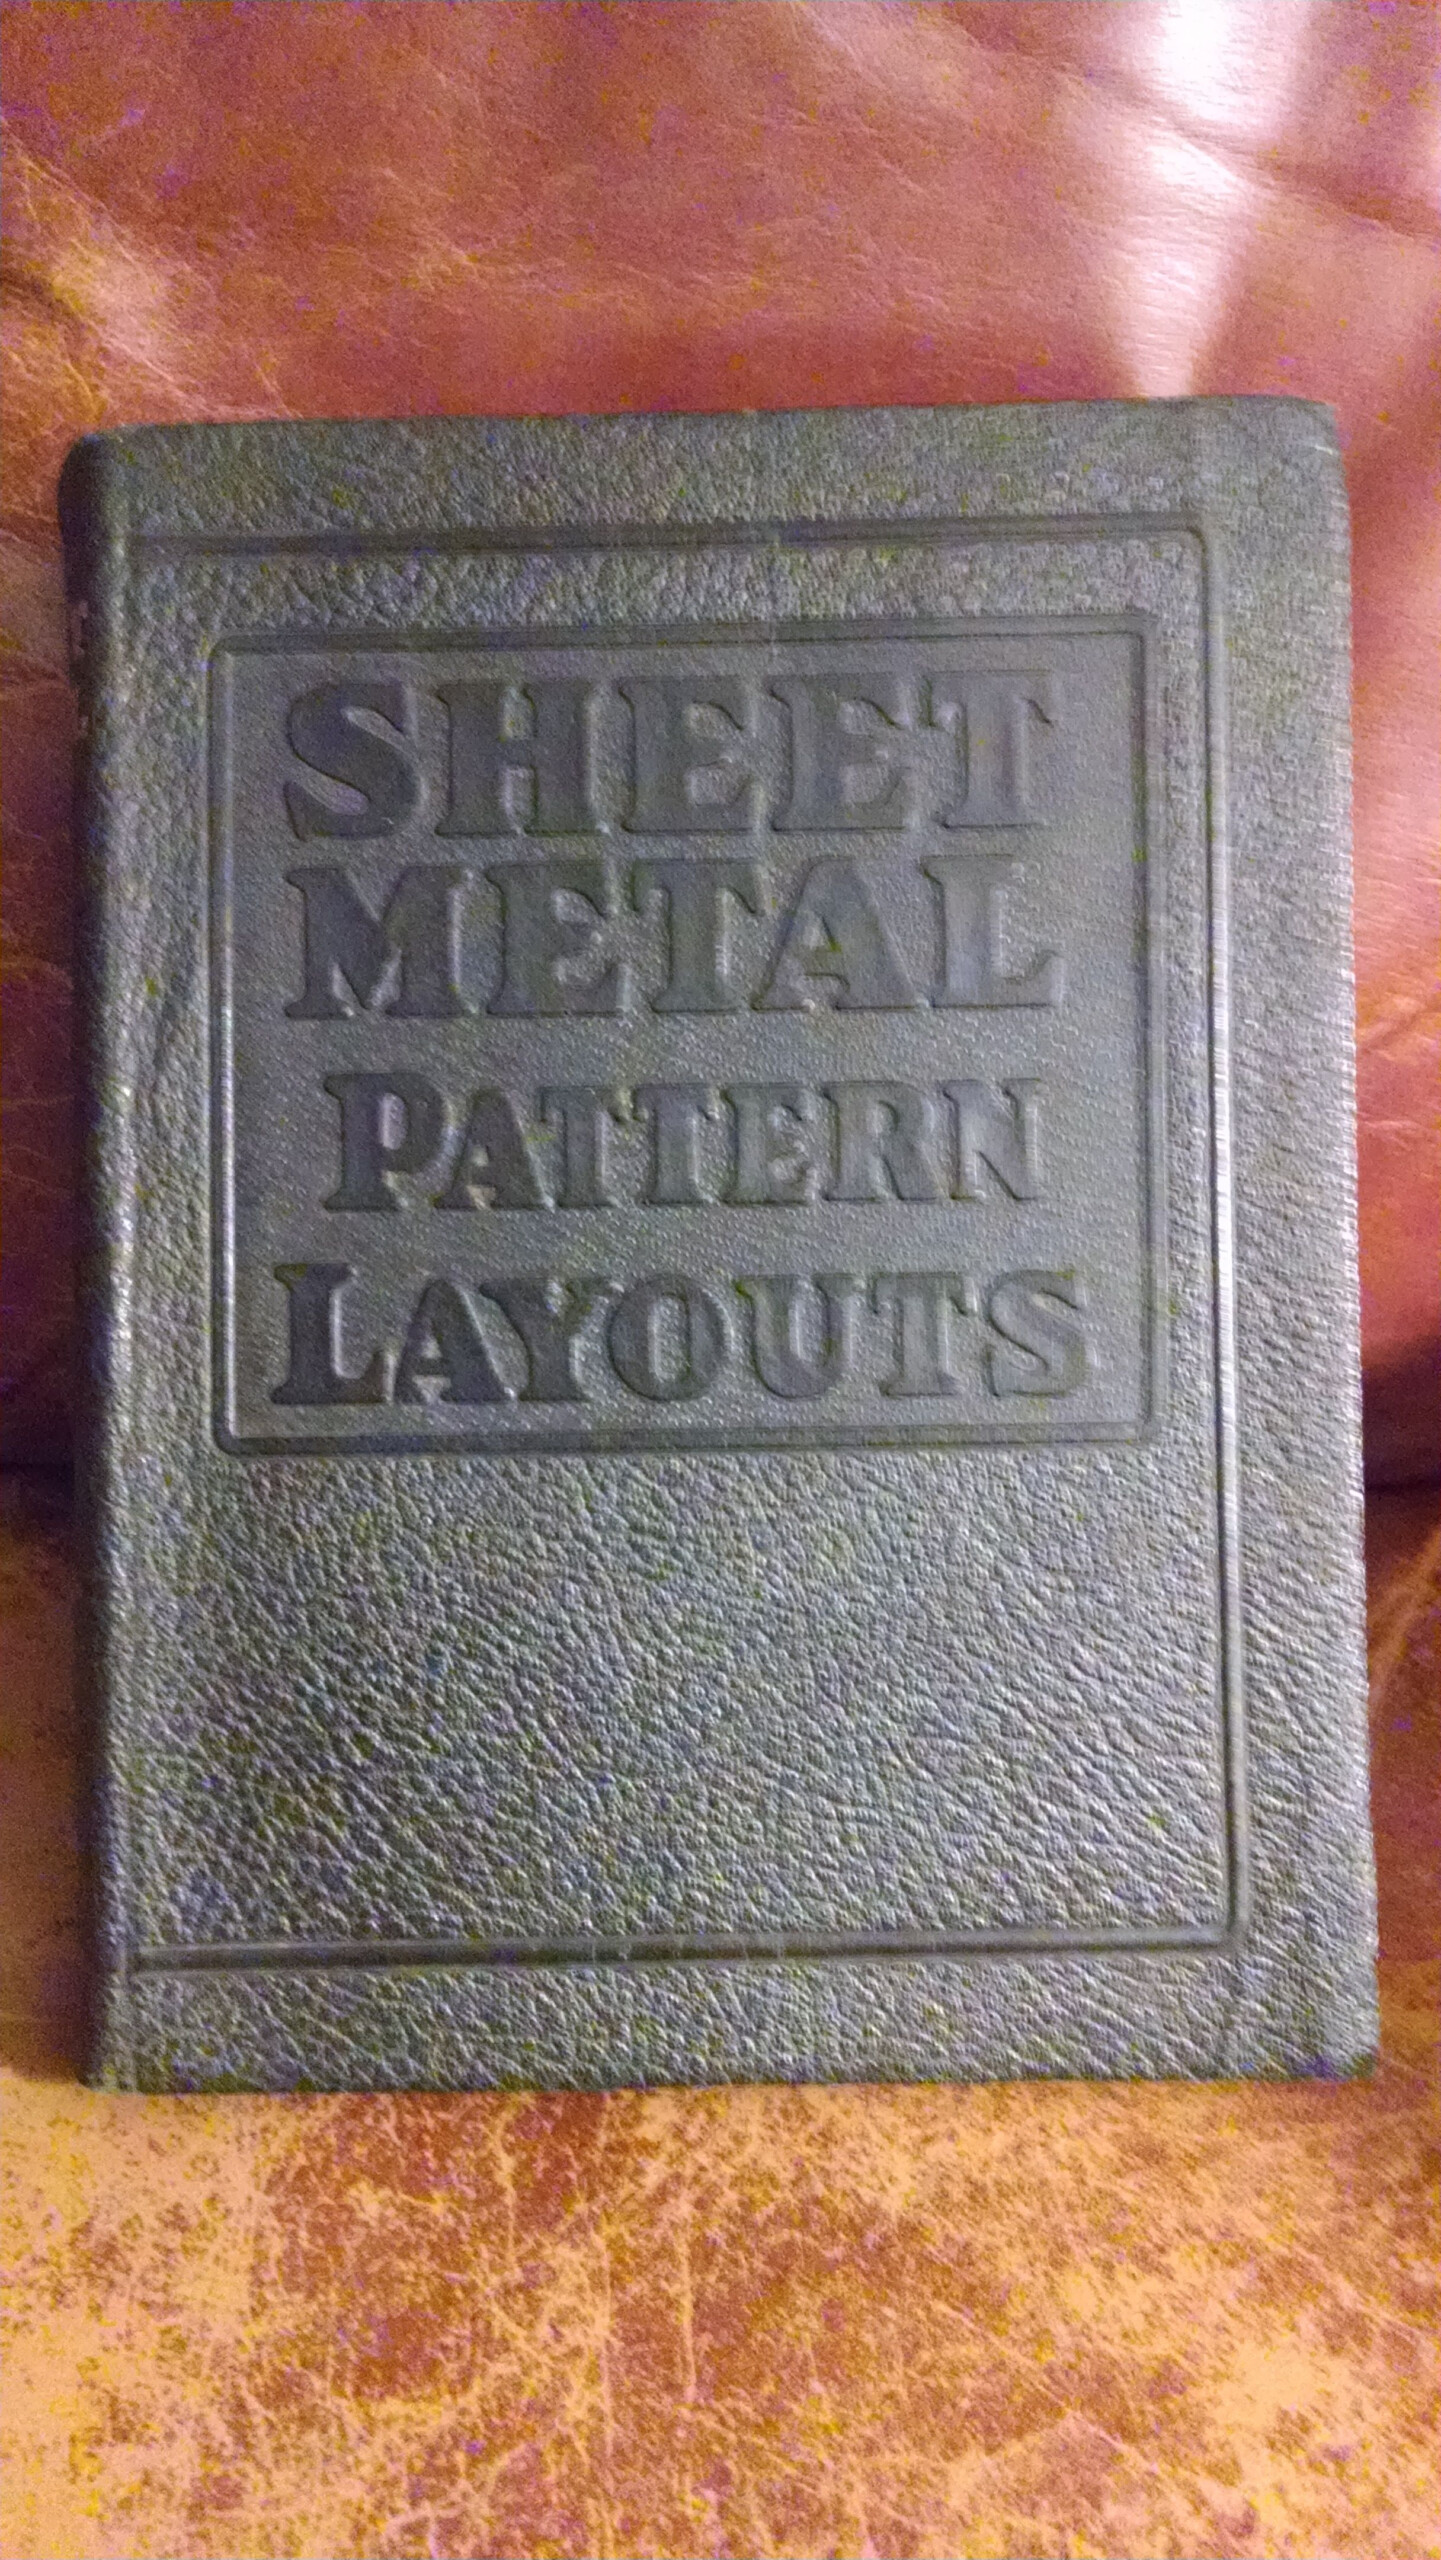 SHEET METAL PATTERN LAYOUTS A PRACTICAL ILLUSTRATED TREATISE COVERING